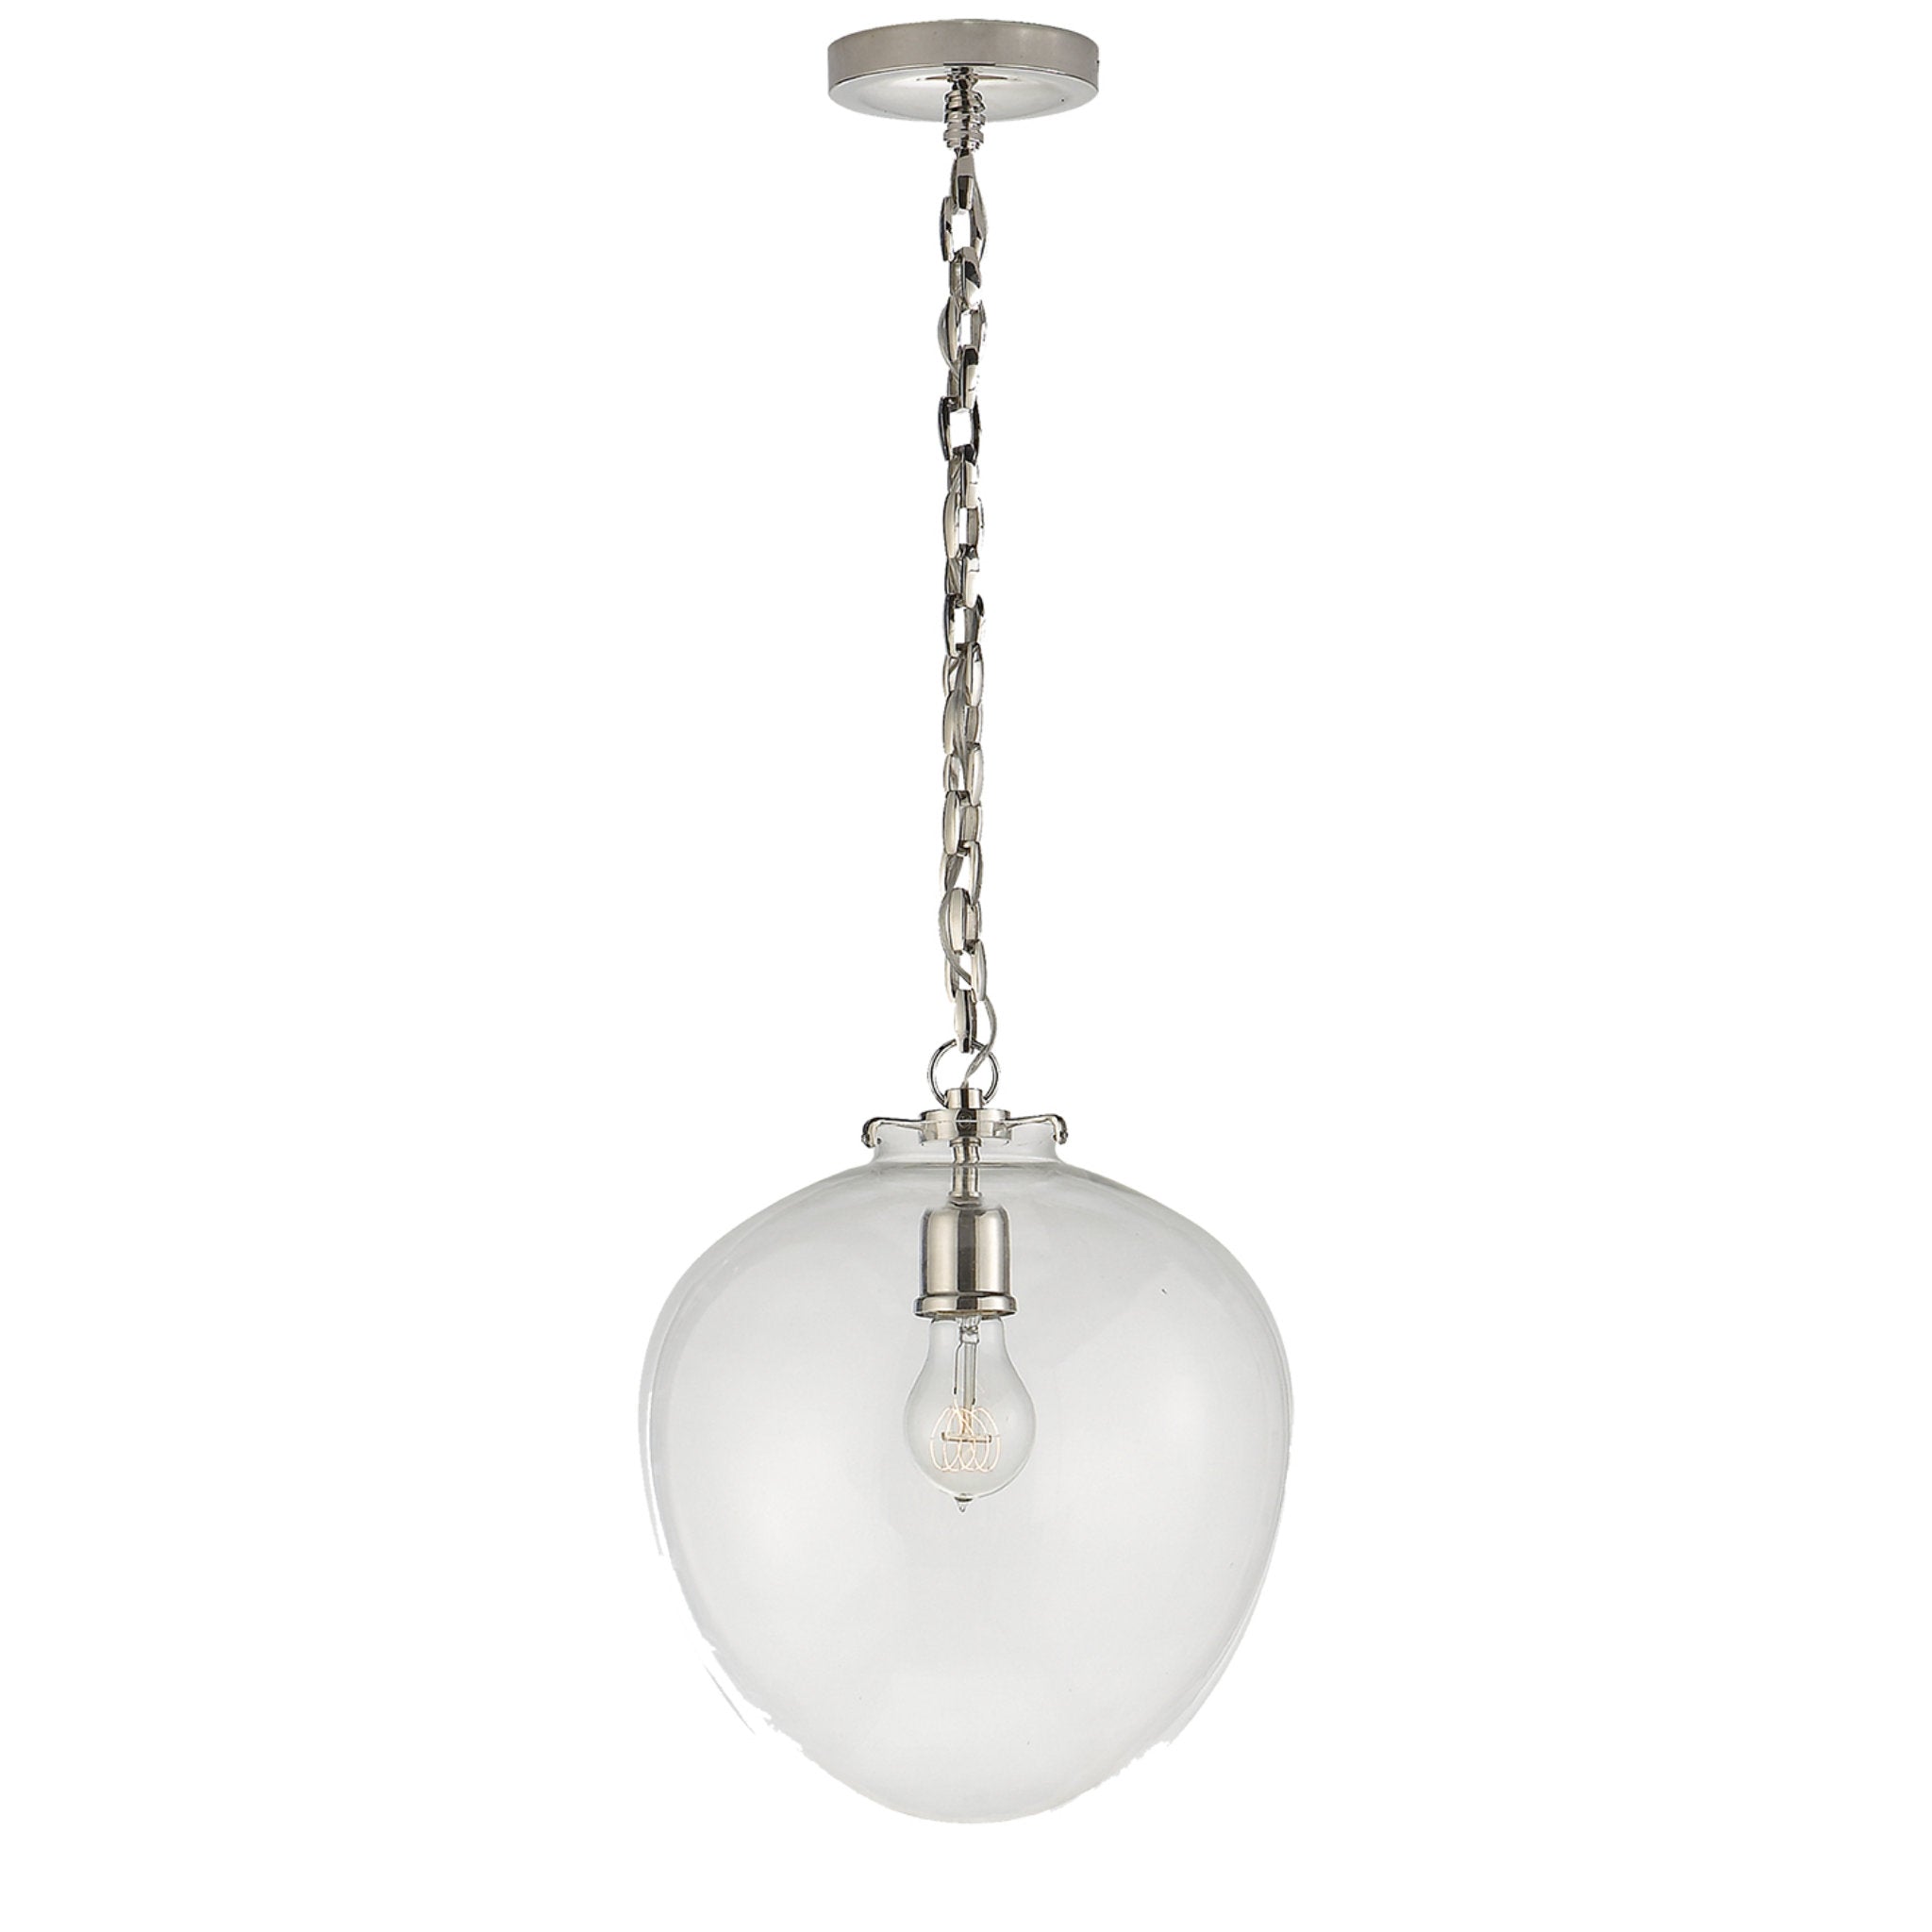 Thomas O'Brien Katie Acorn Pendant in Polished Nickel with Clear Glass